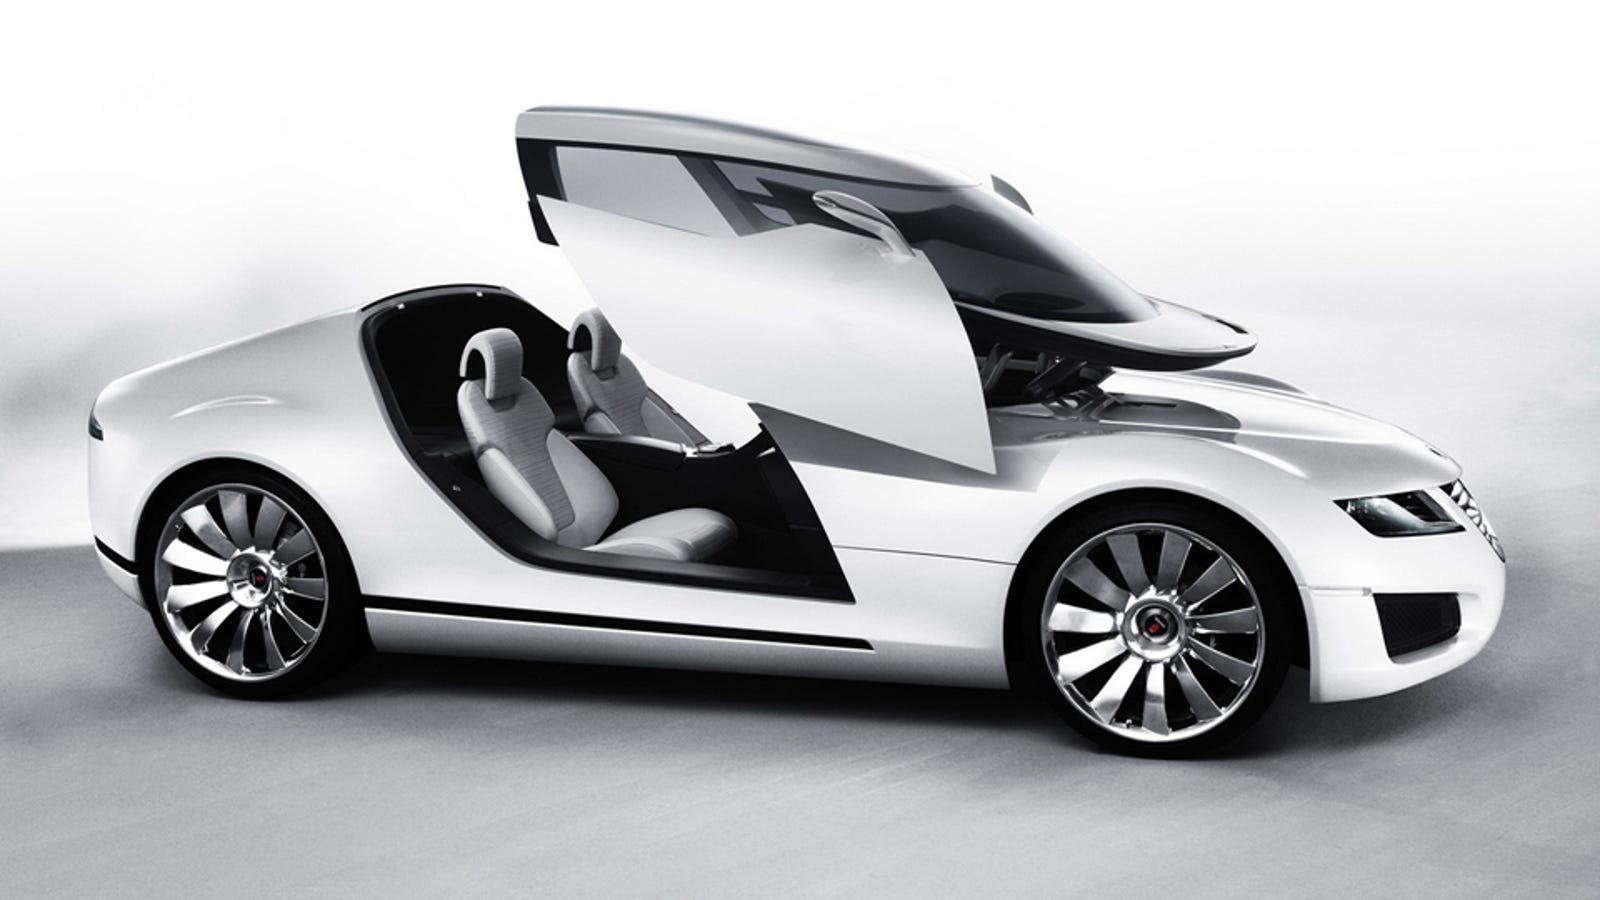 Ten Features An 'Apple Car' Would Have